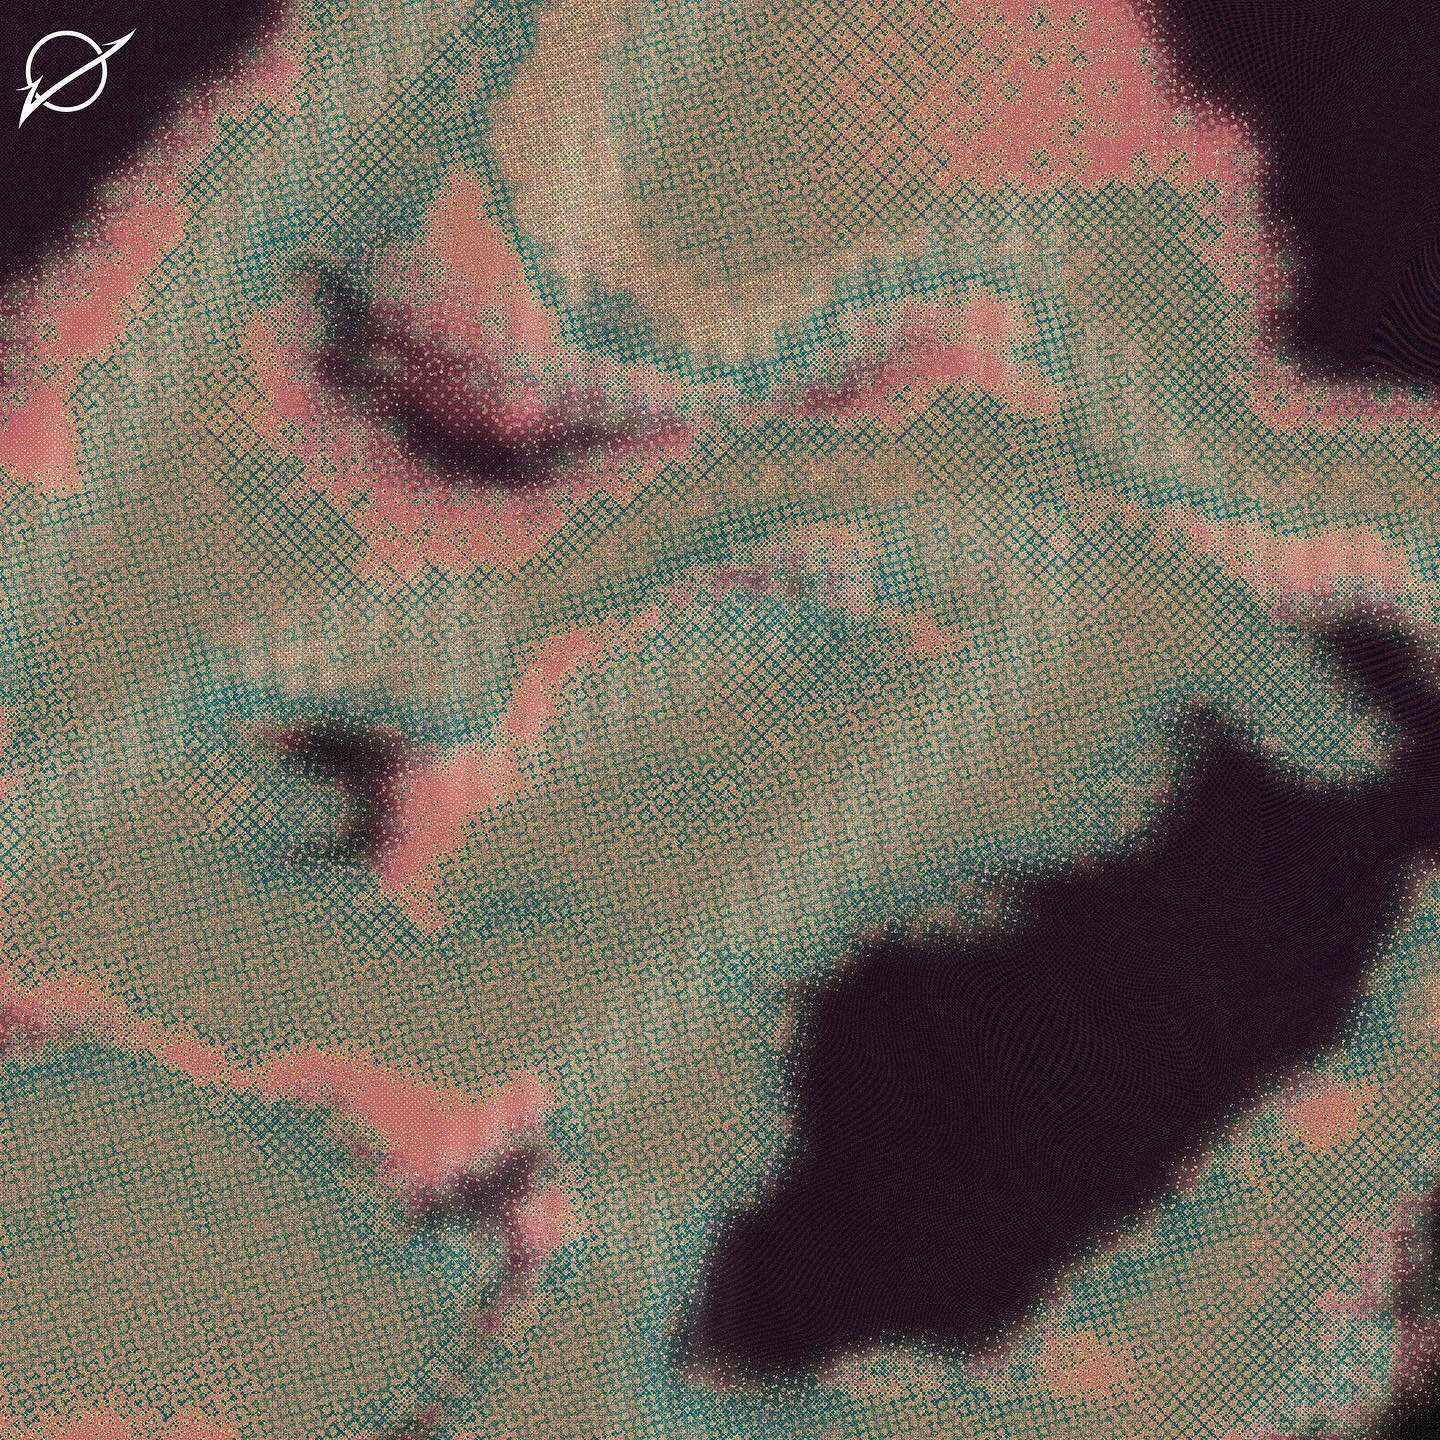 &ldquo;yours&rdquo;, a hauntingly beautiful piece produced by @exmaxhina that immerses the listener into a complex soundscape of dark lofi glitch. the piece opens up with a melancholic guitar melody, setting a moody tone. as the song progresses, laye